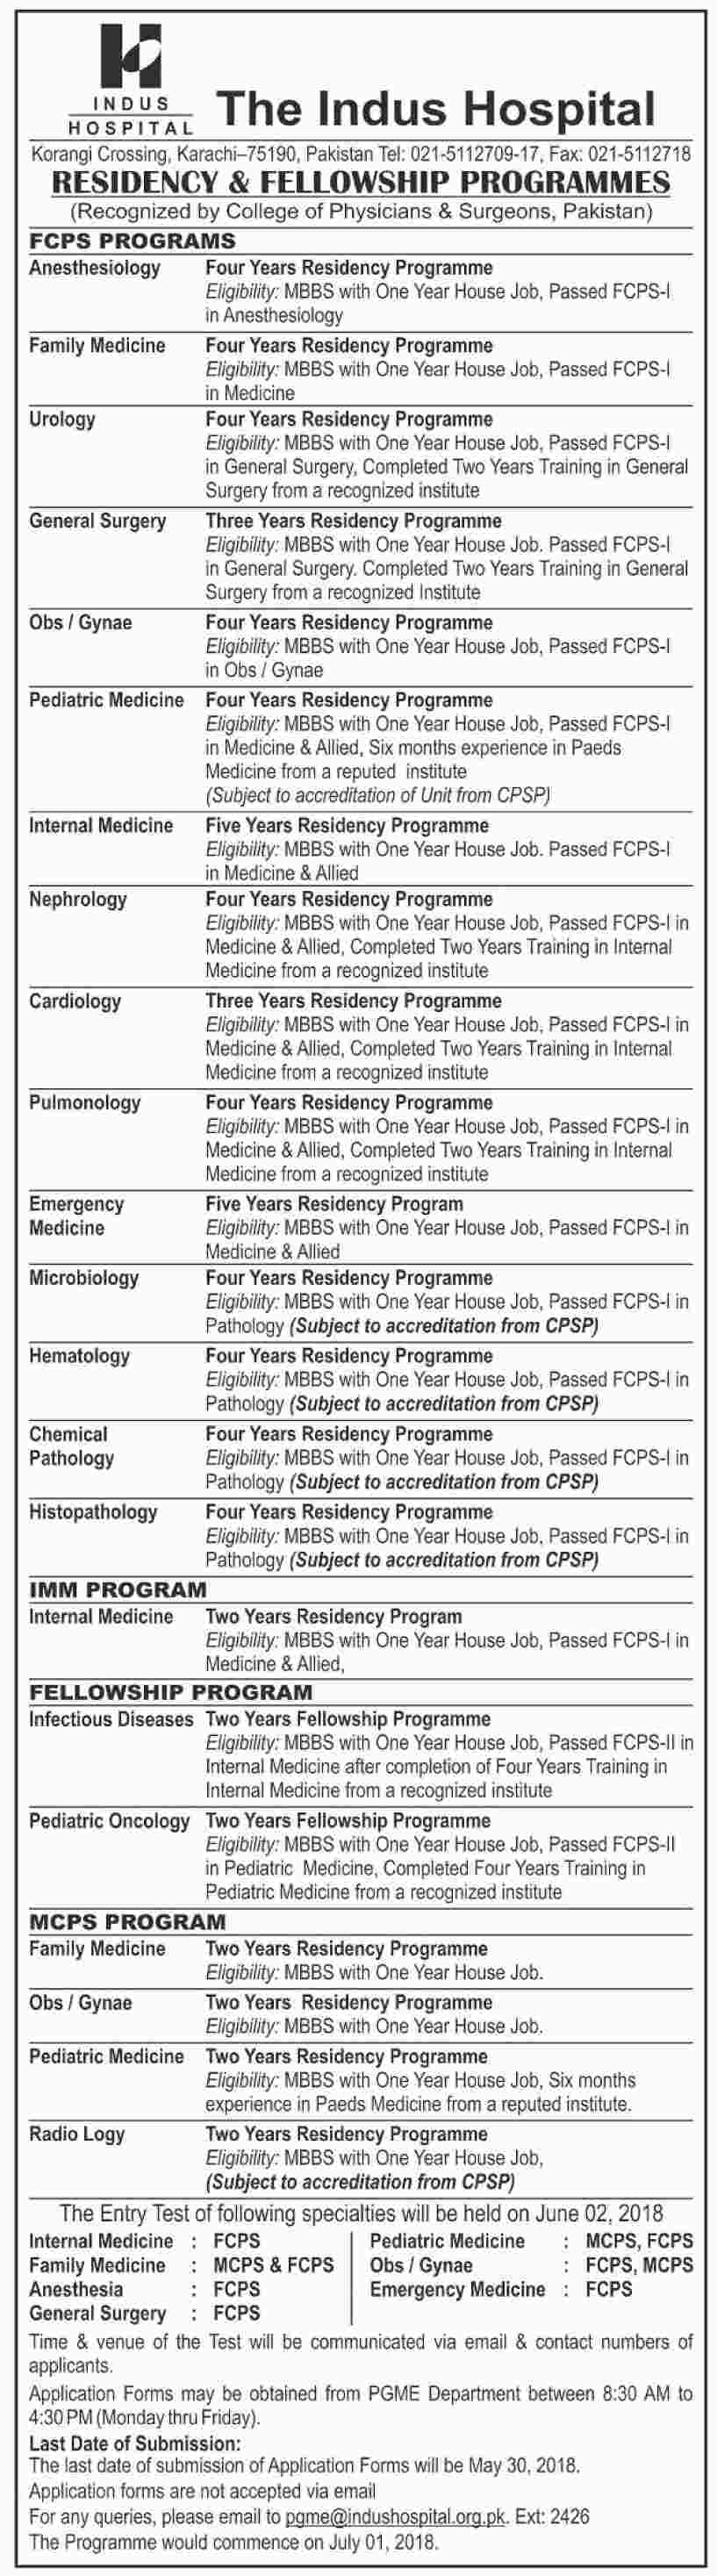 Jobs in The Indus Hospital 13 May 2018